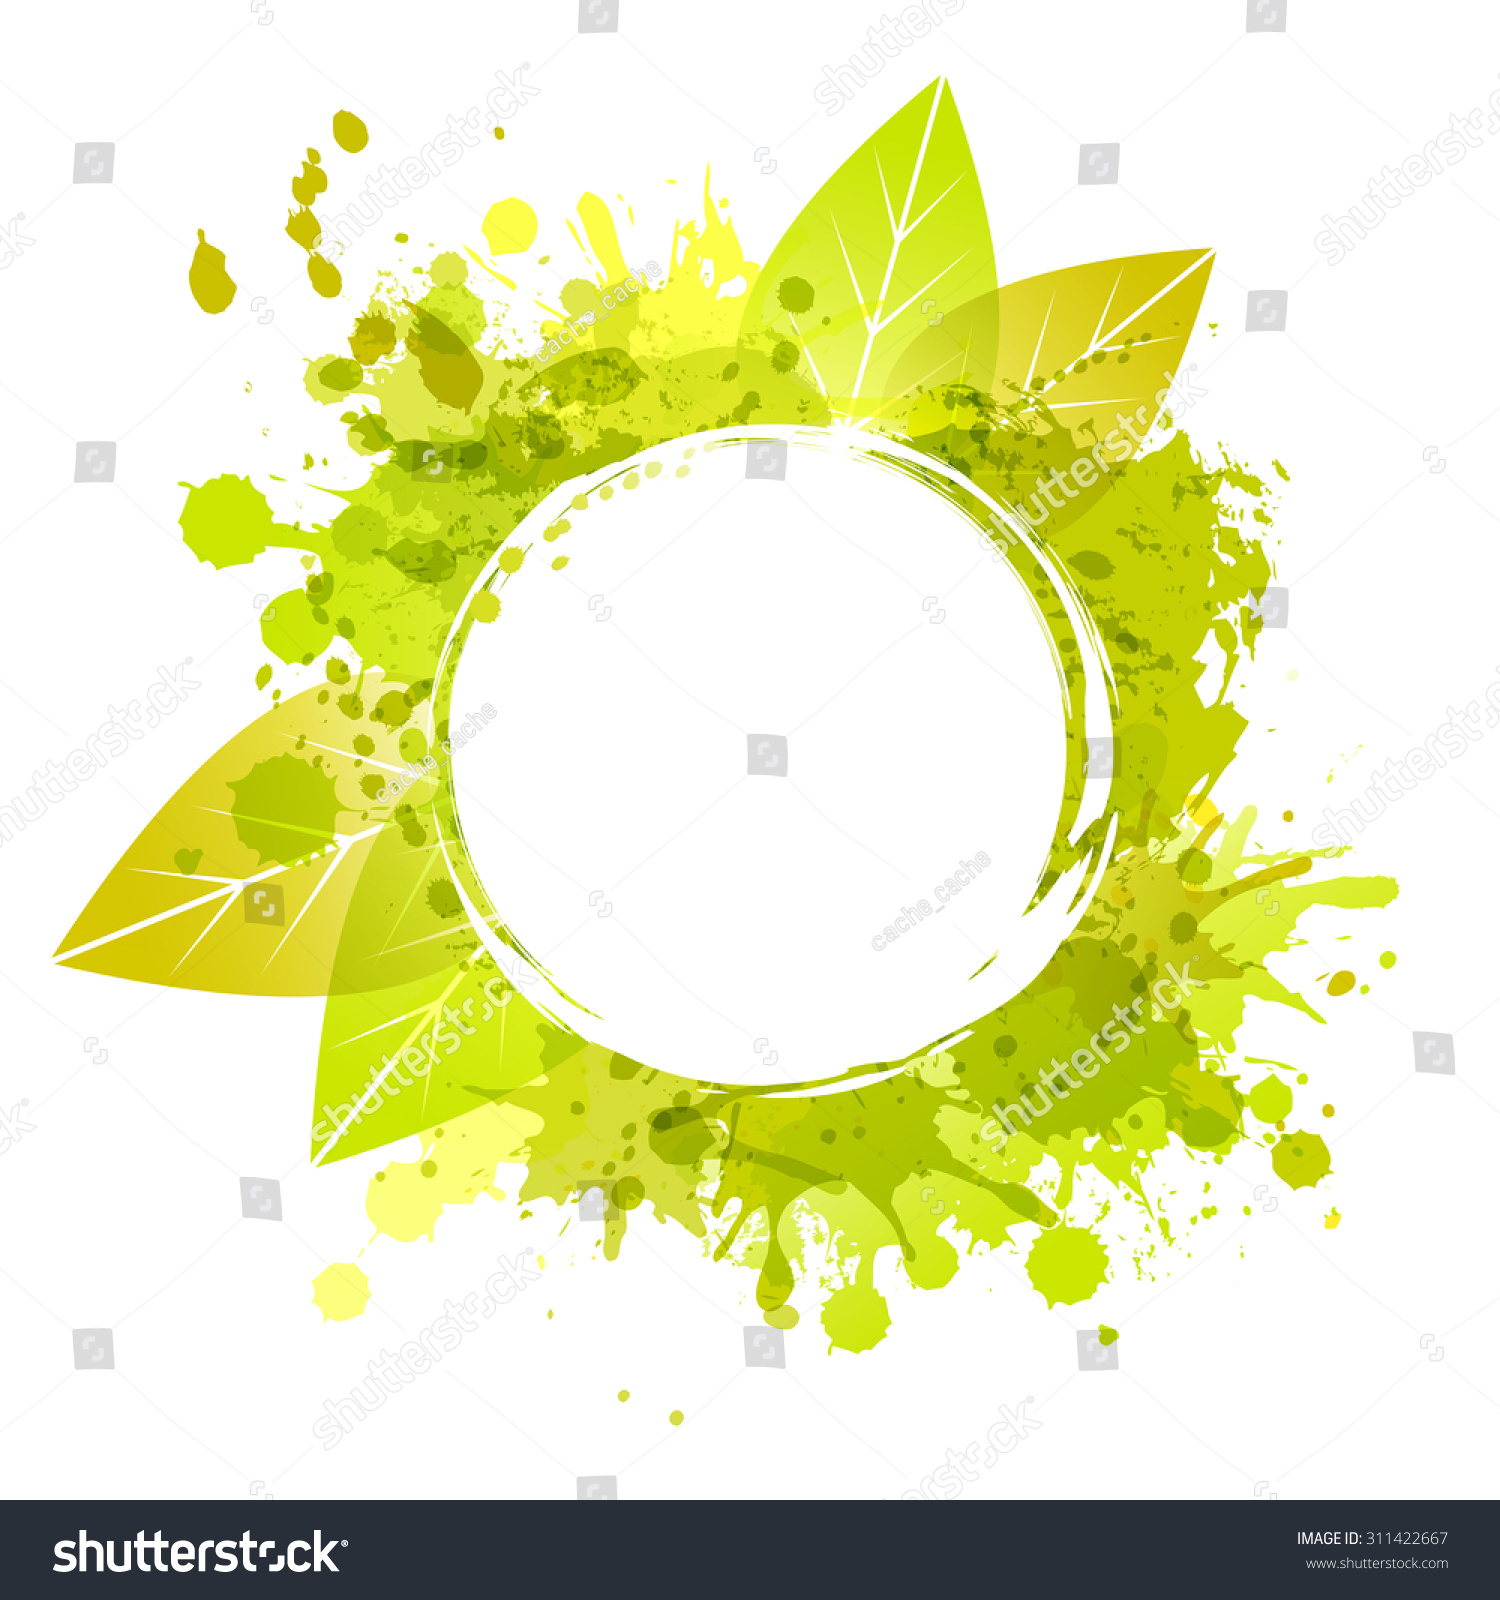 Frame Round Green Vector Background Leaves Stock Vector Royalty Free Shutterstock